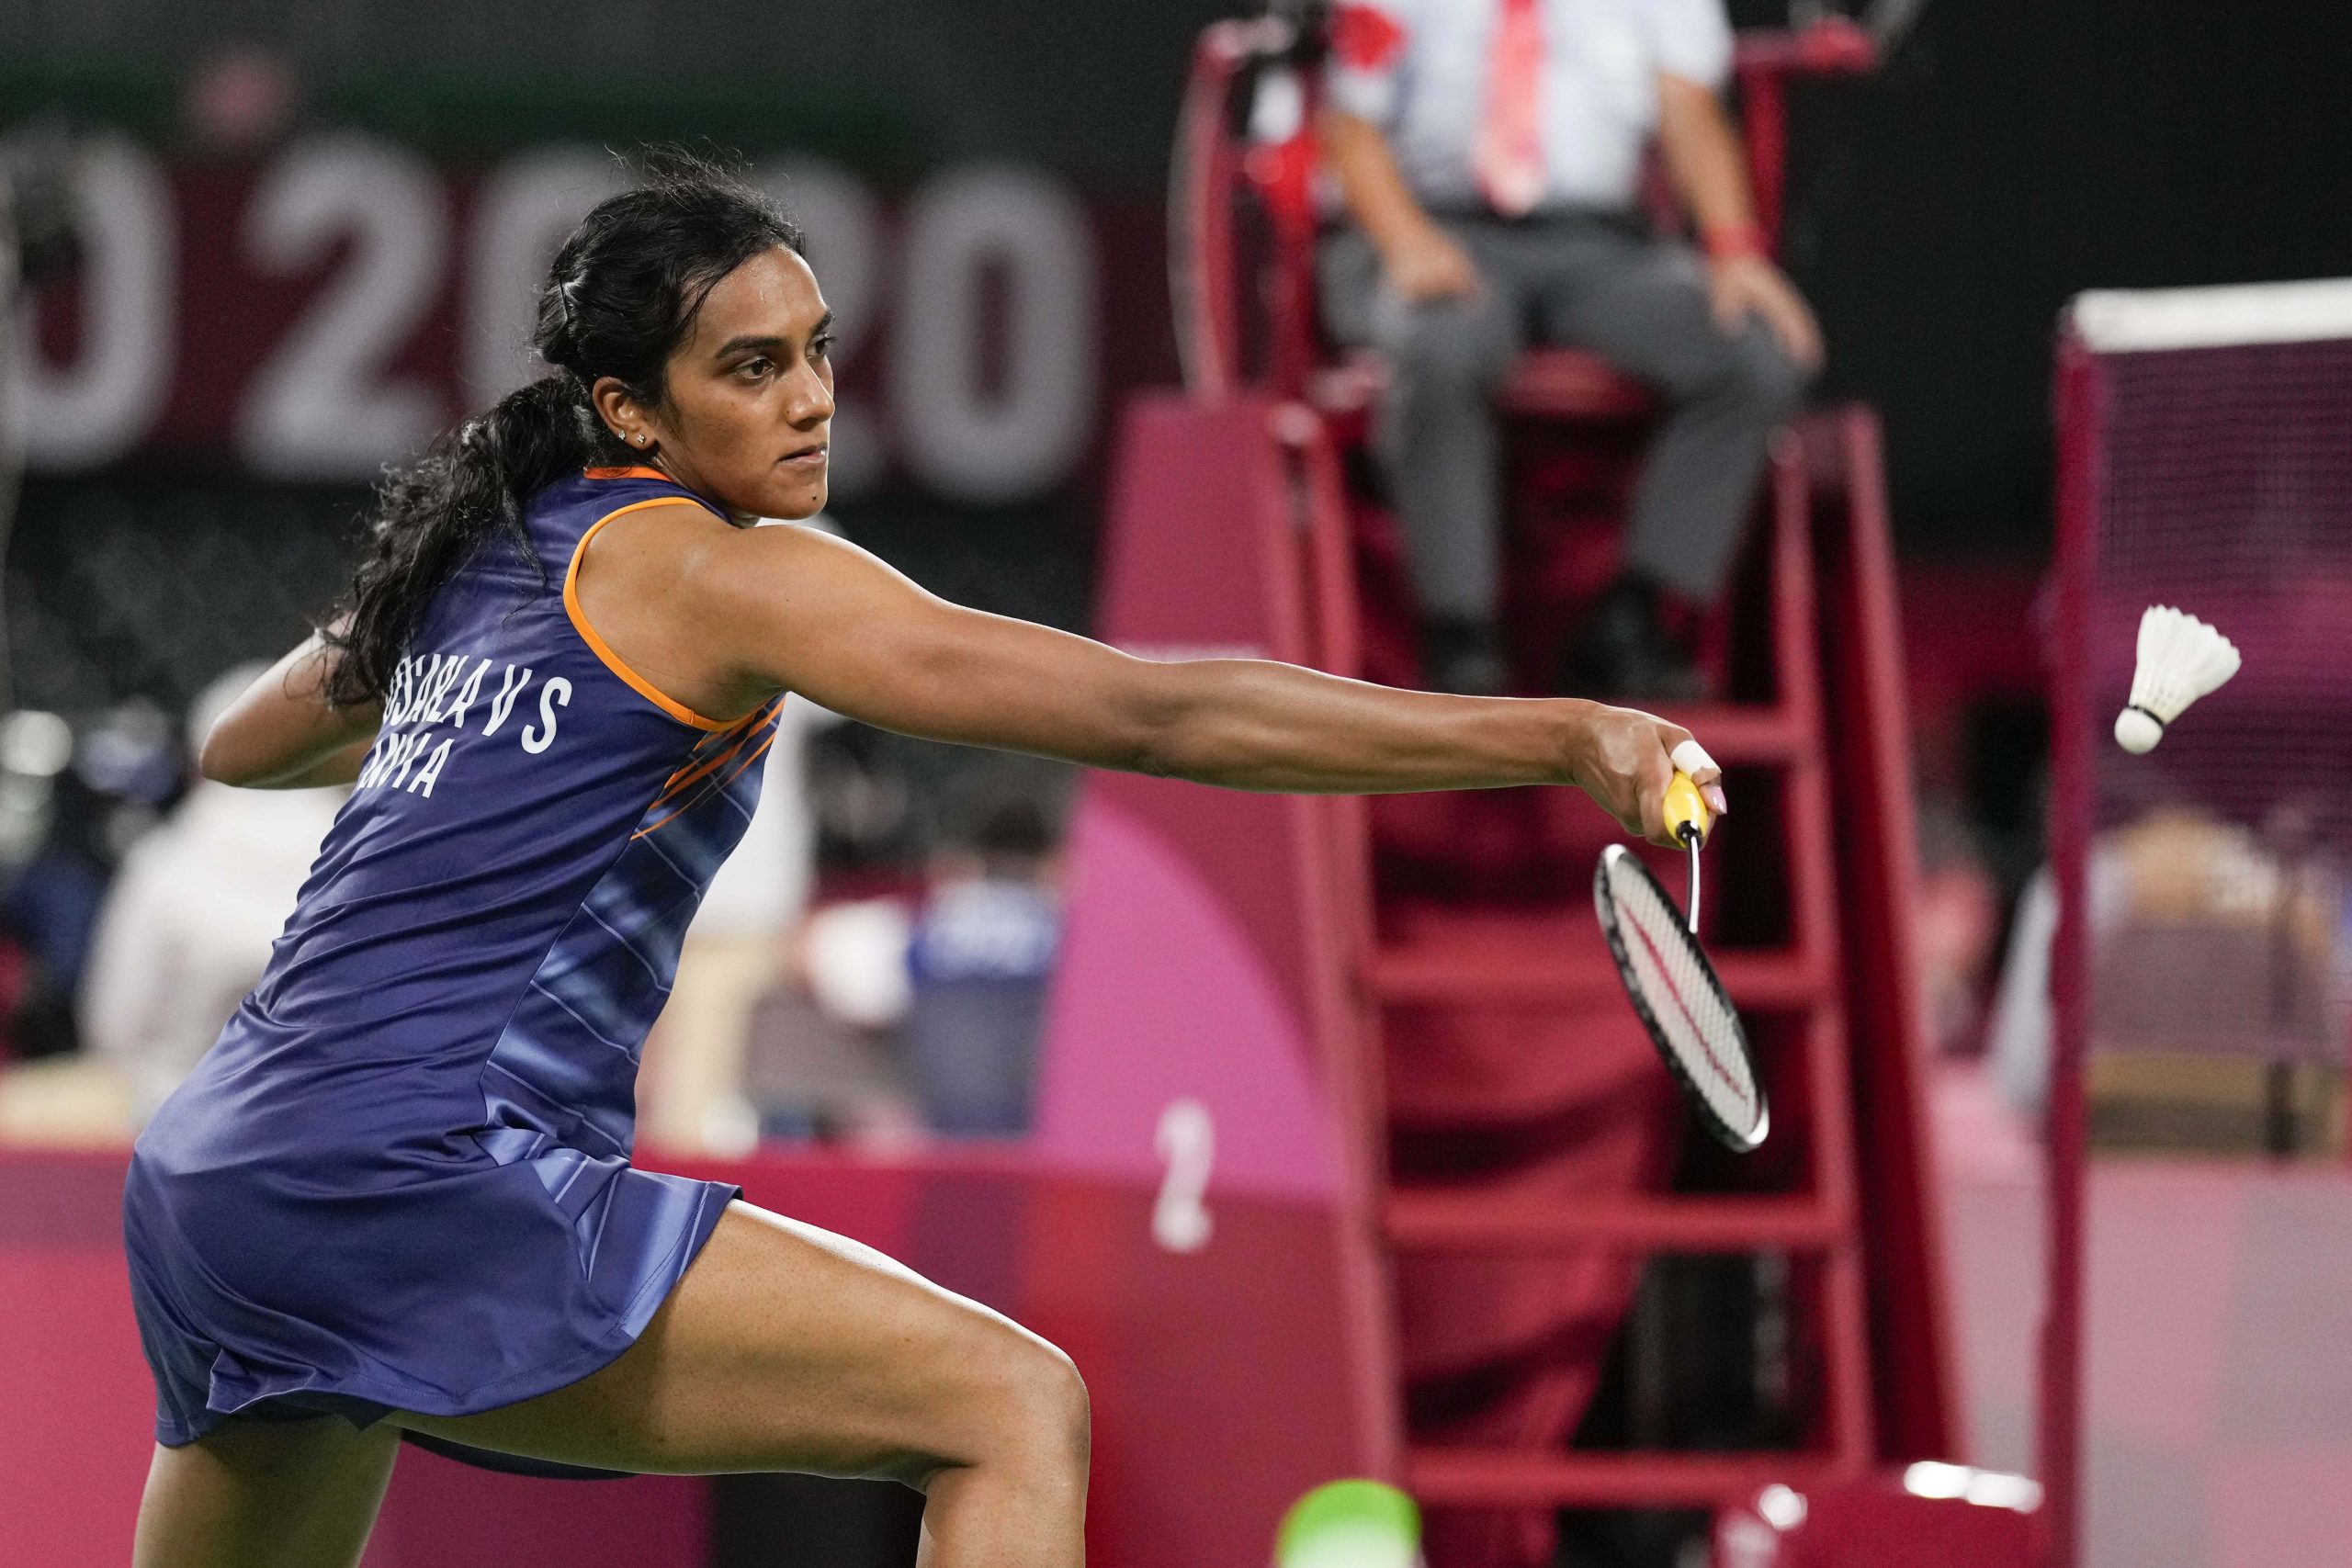 Working on technique: Sindhu on her solid Olympic opening match performance